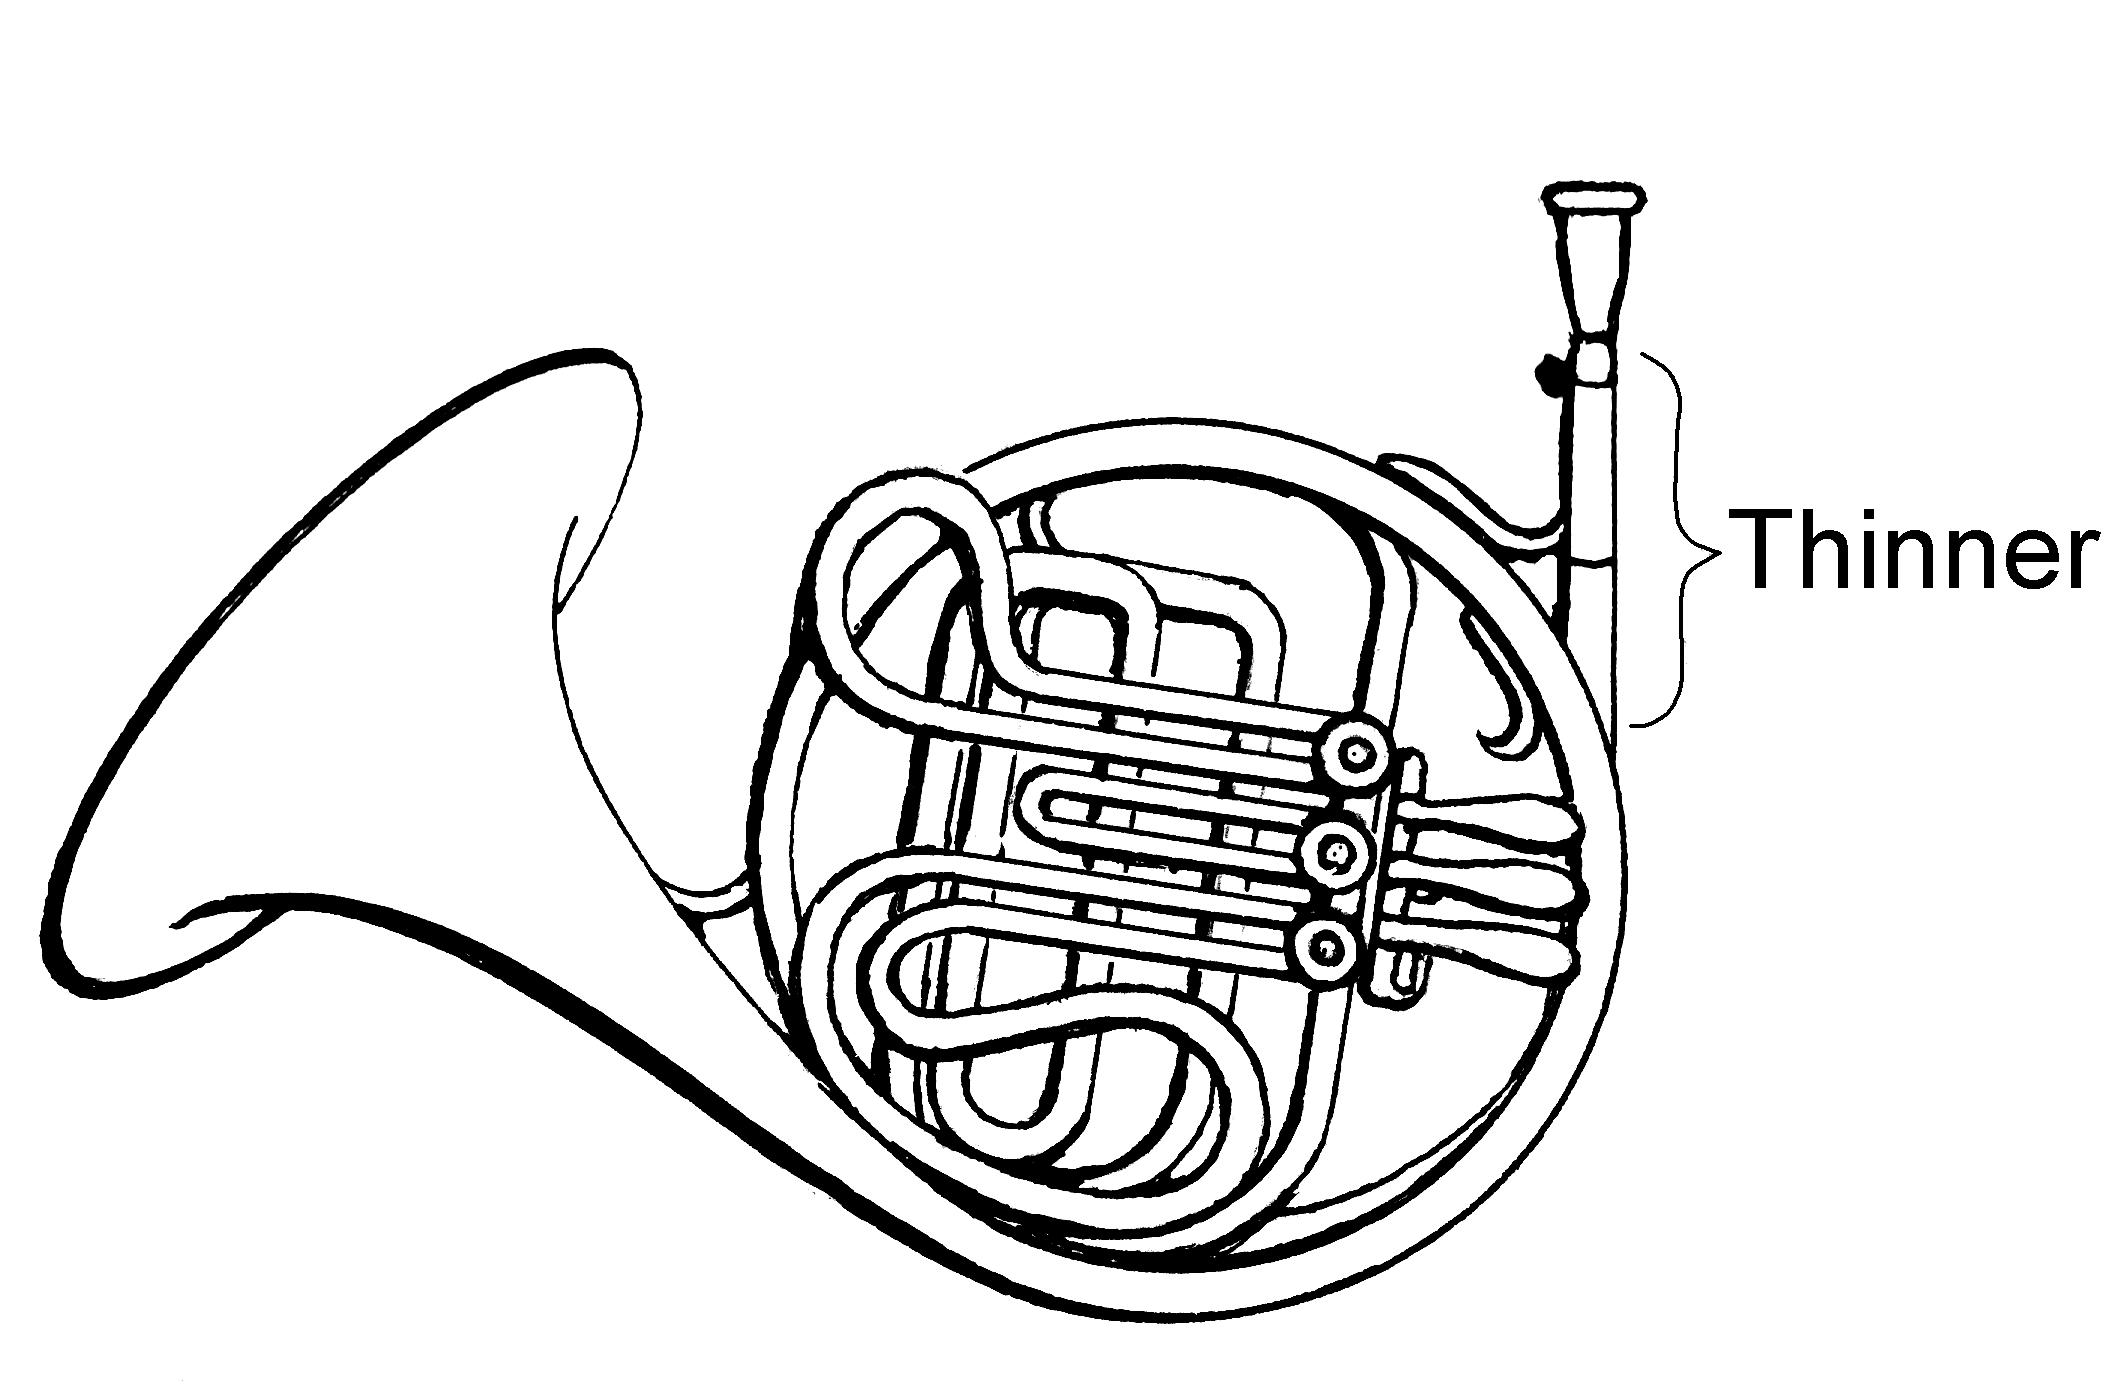 french horn drawings - Google